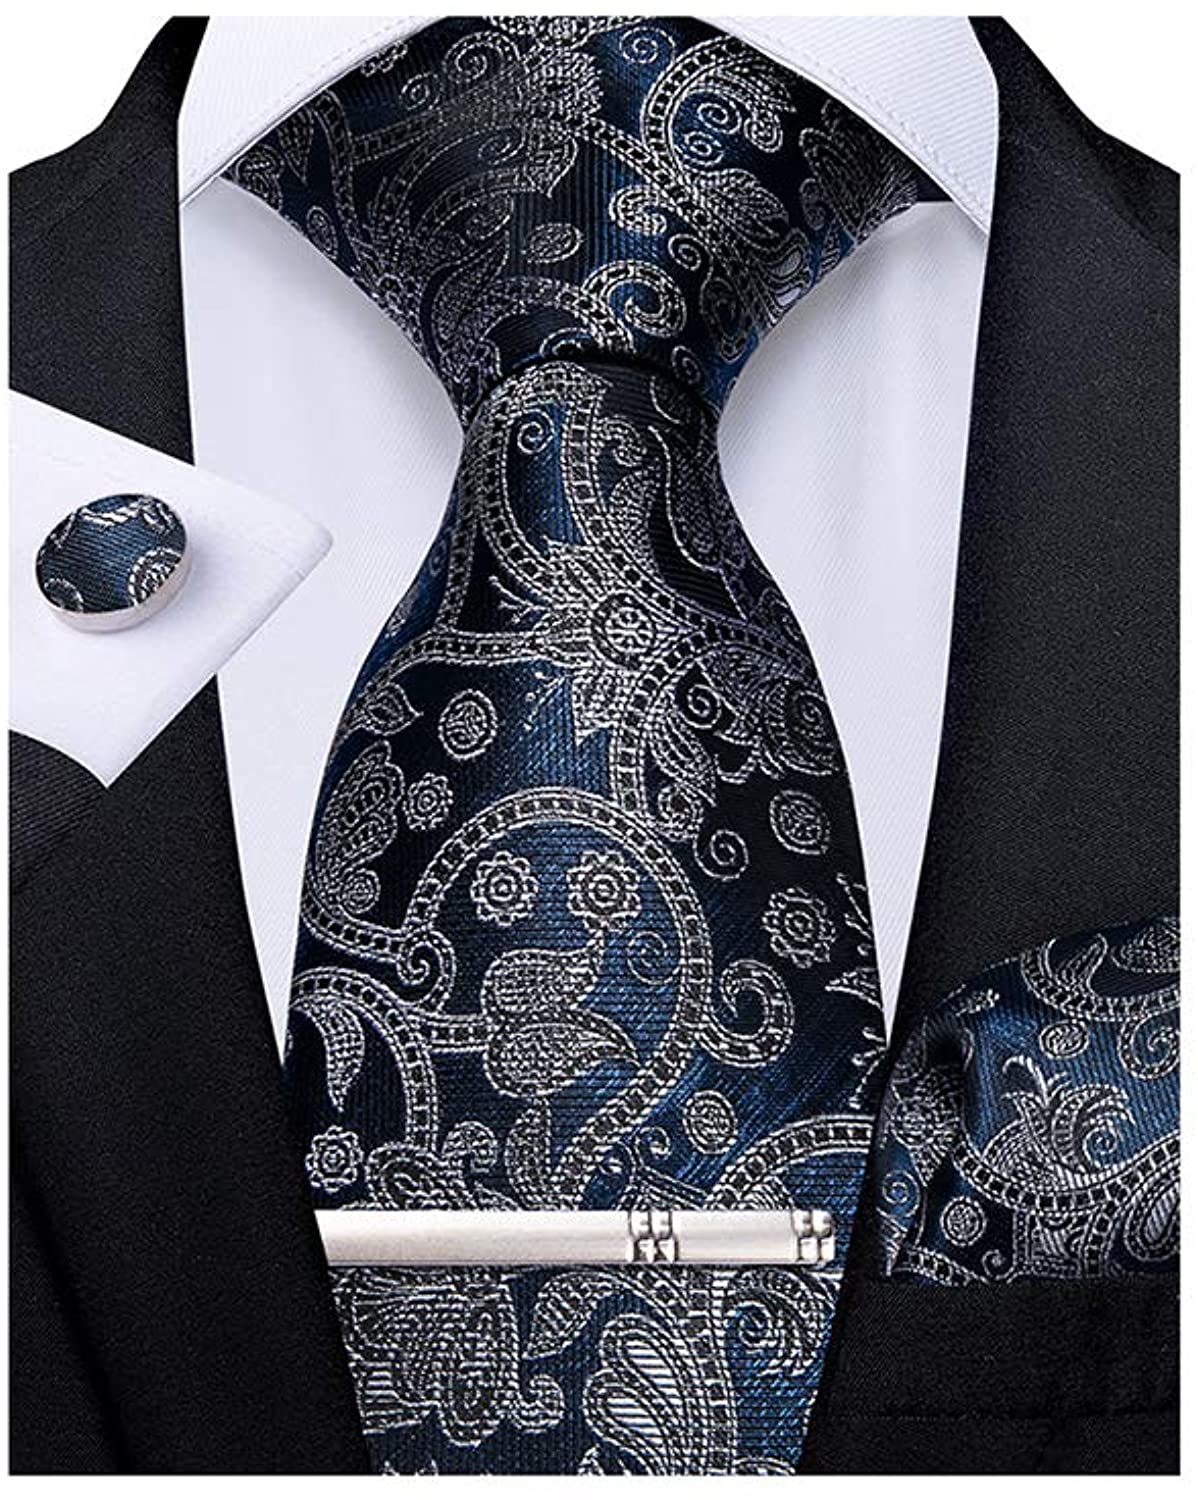 New Polyester Woven Men's neck tie and hankie set pattern blue silver formal 